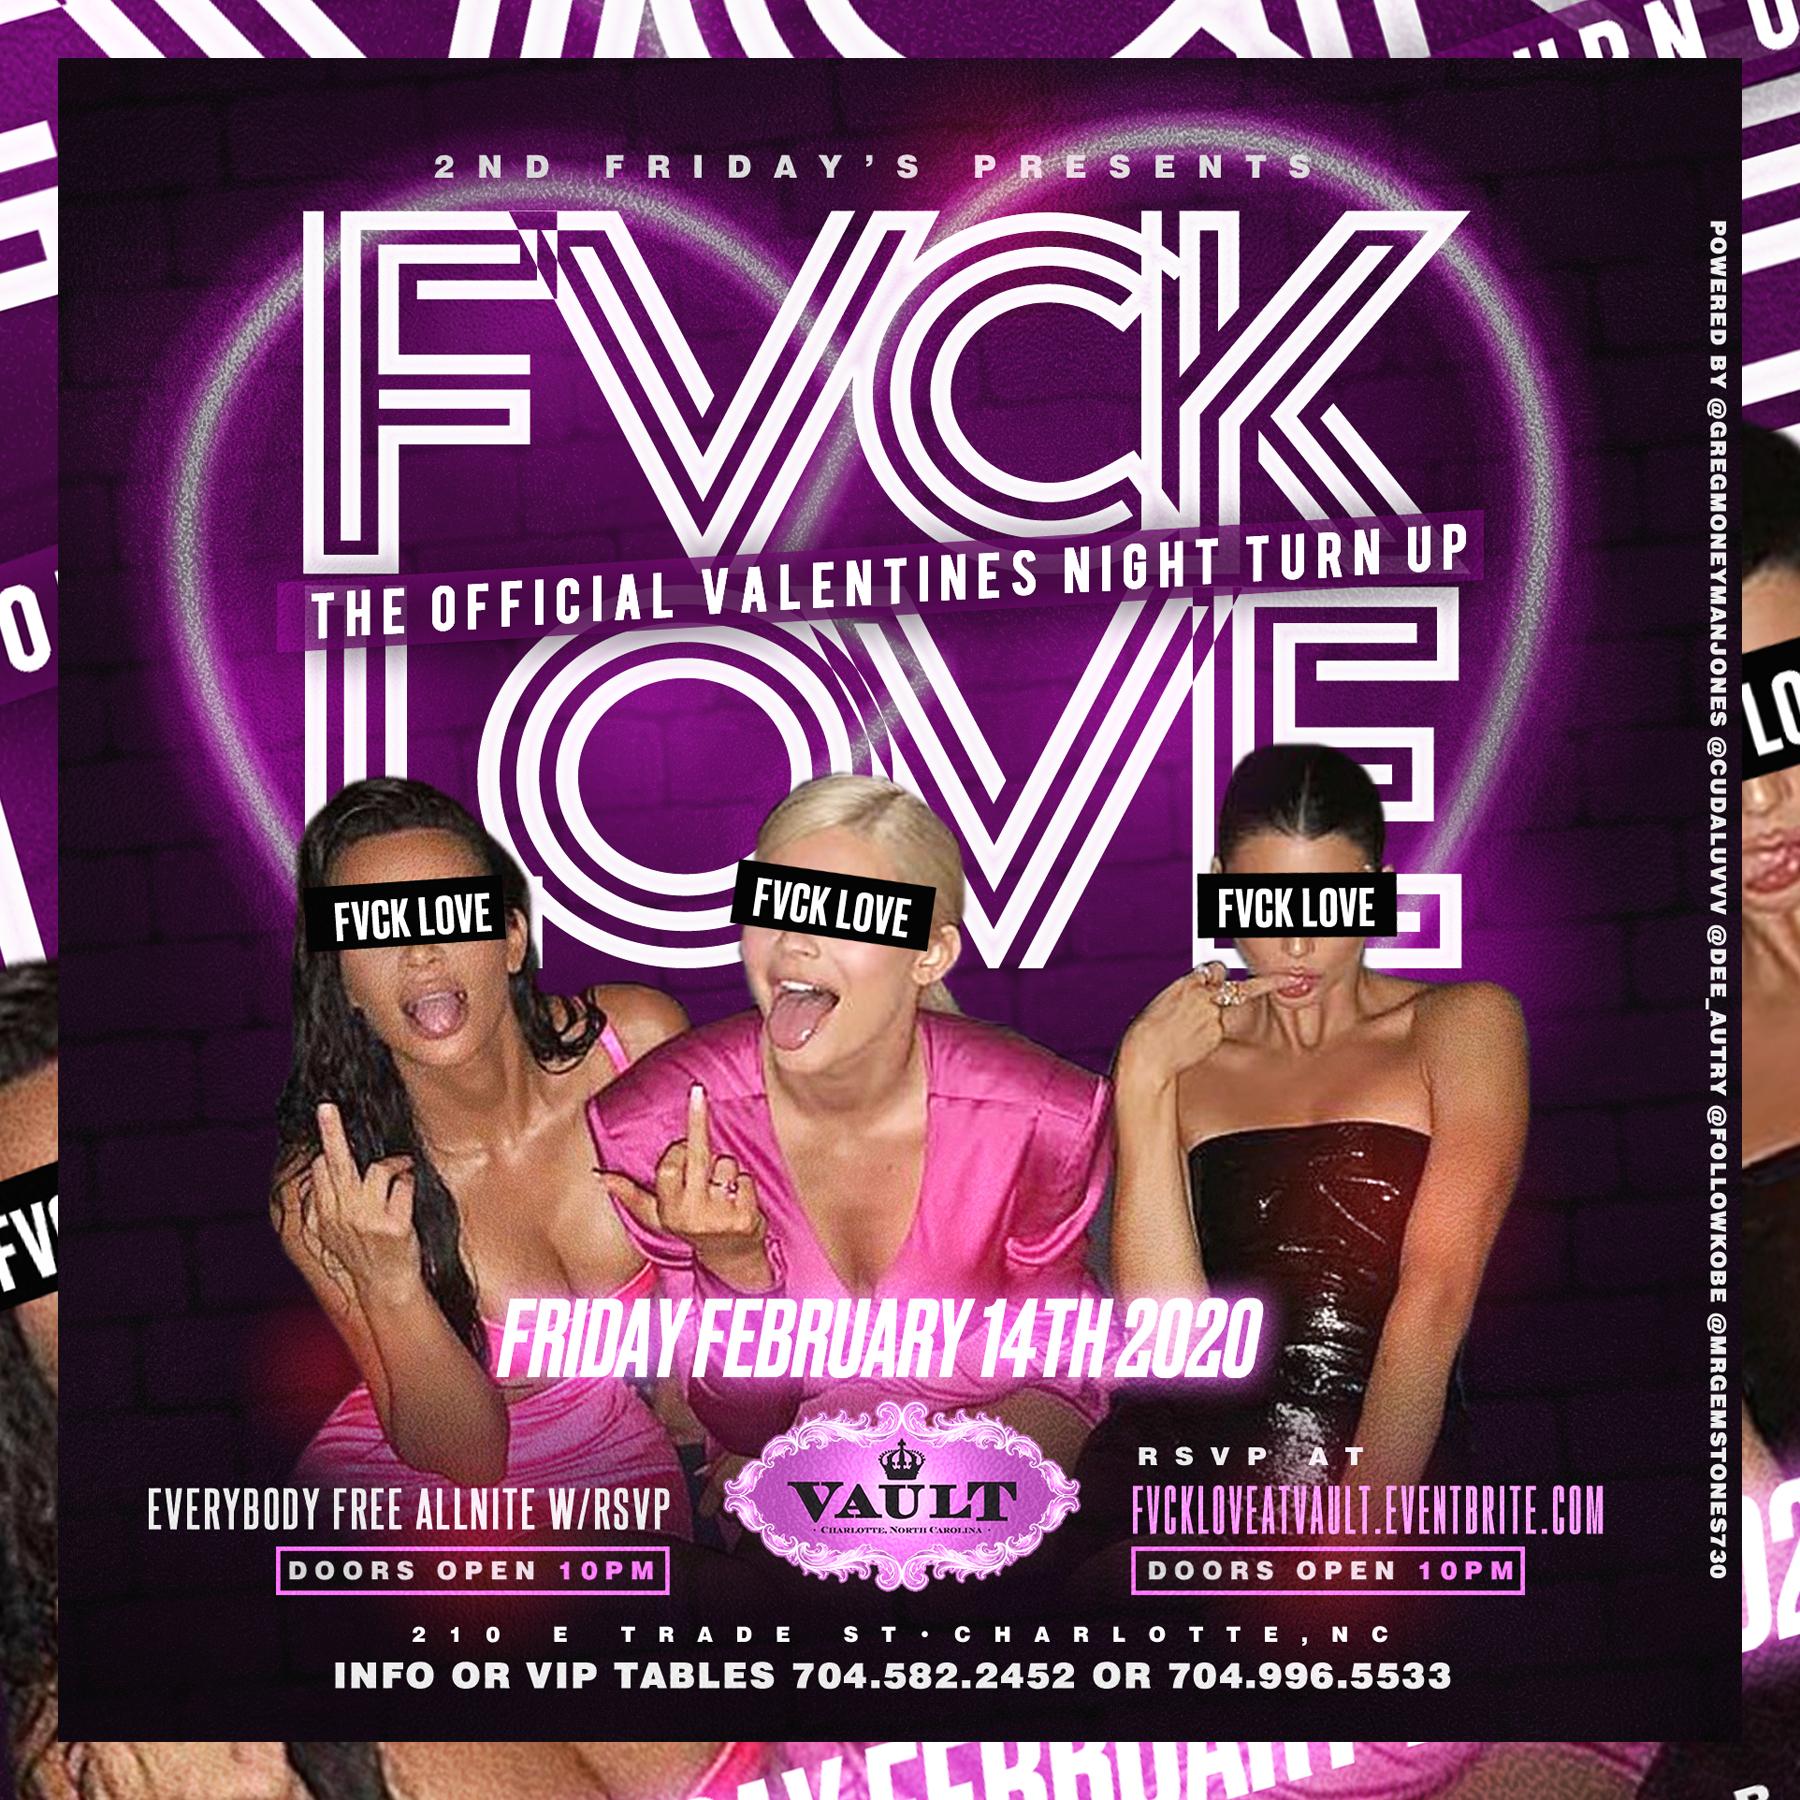 2nd fridays at vault present “FVCK LOVE” valentine day party